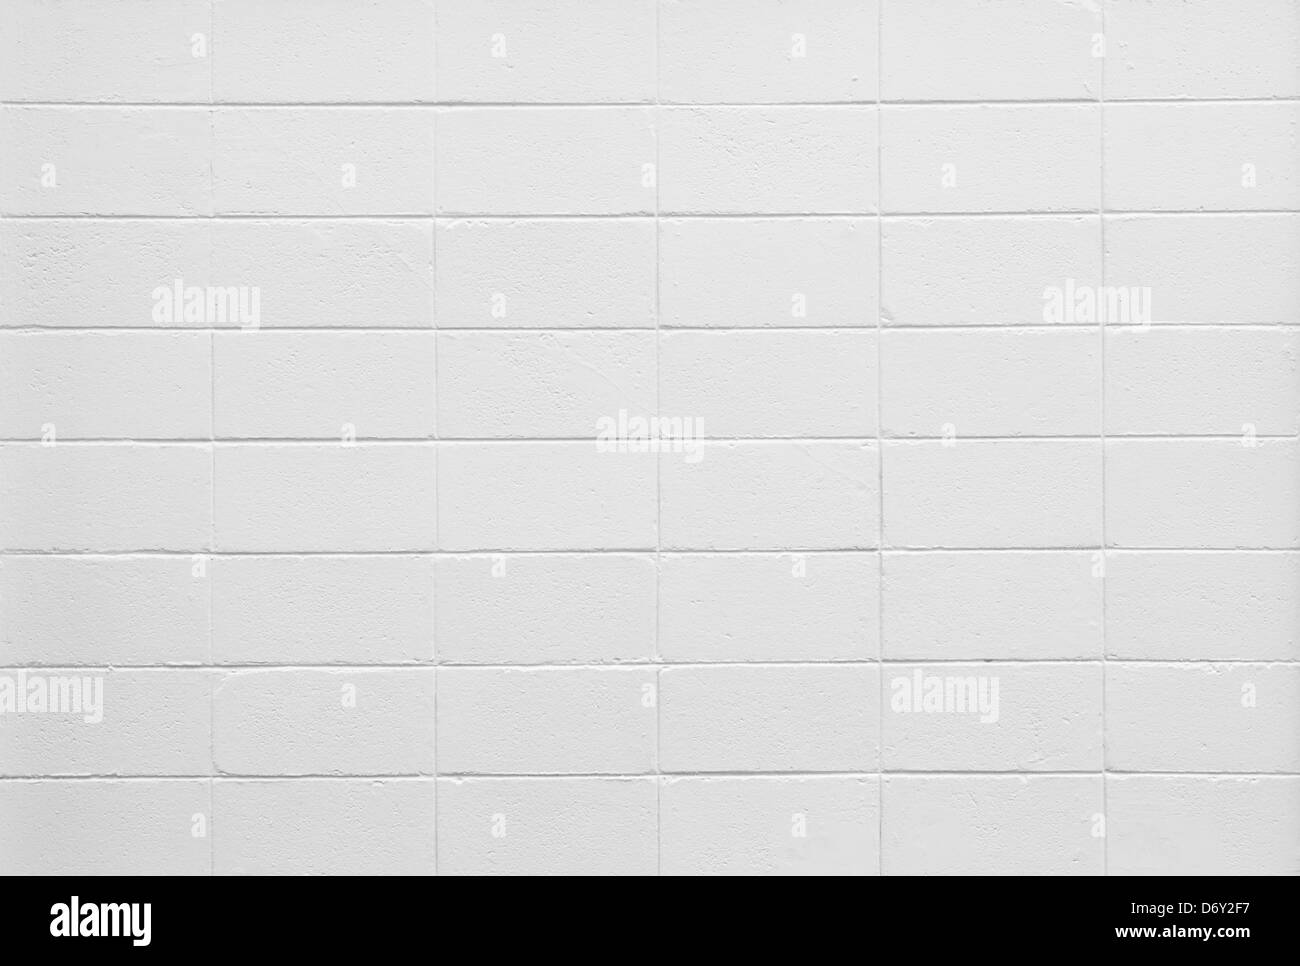 White color painted brick wall Stock Photo